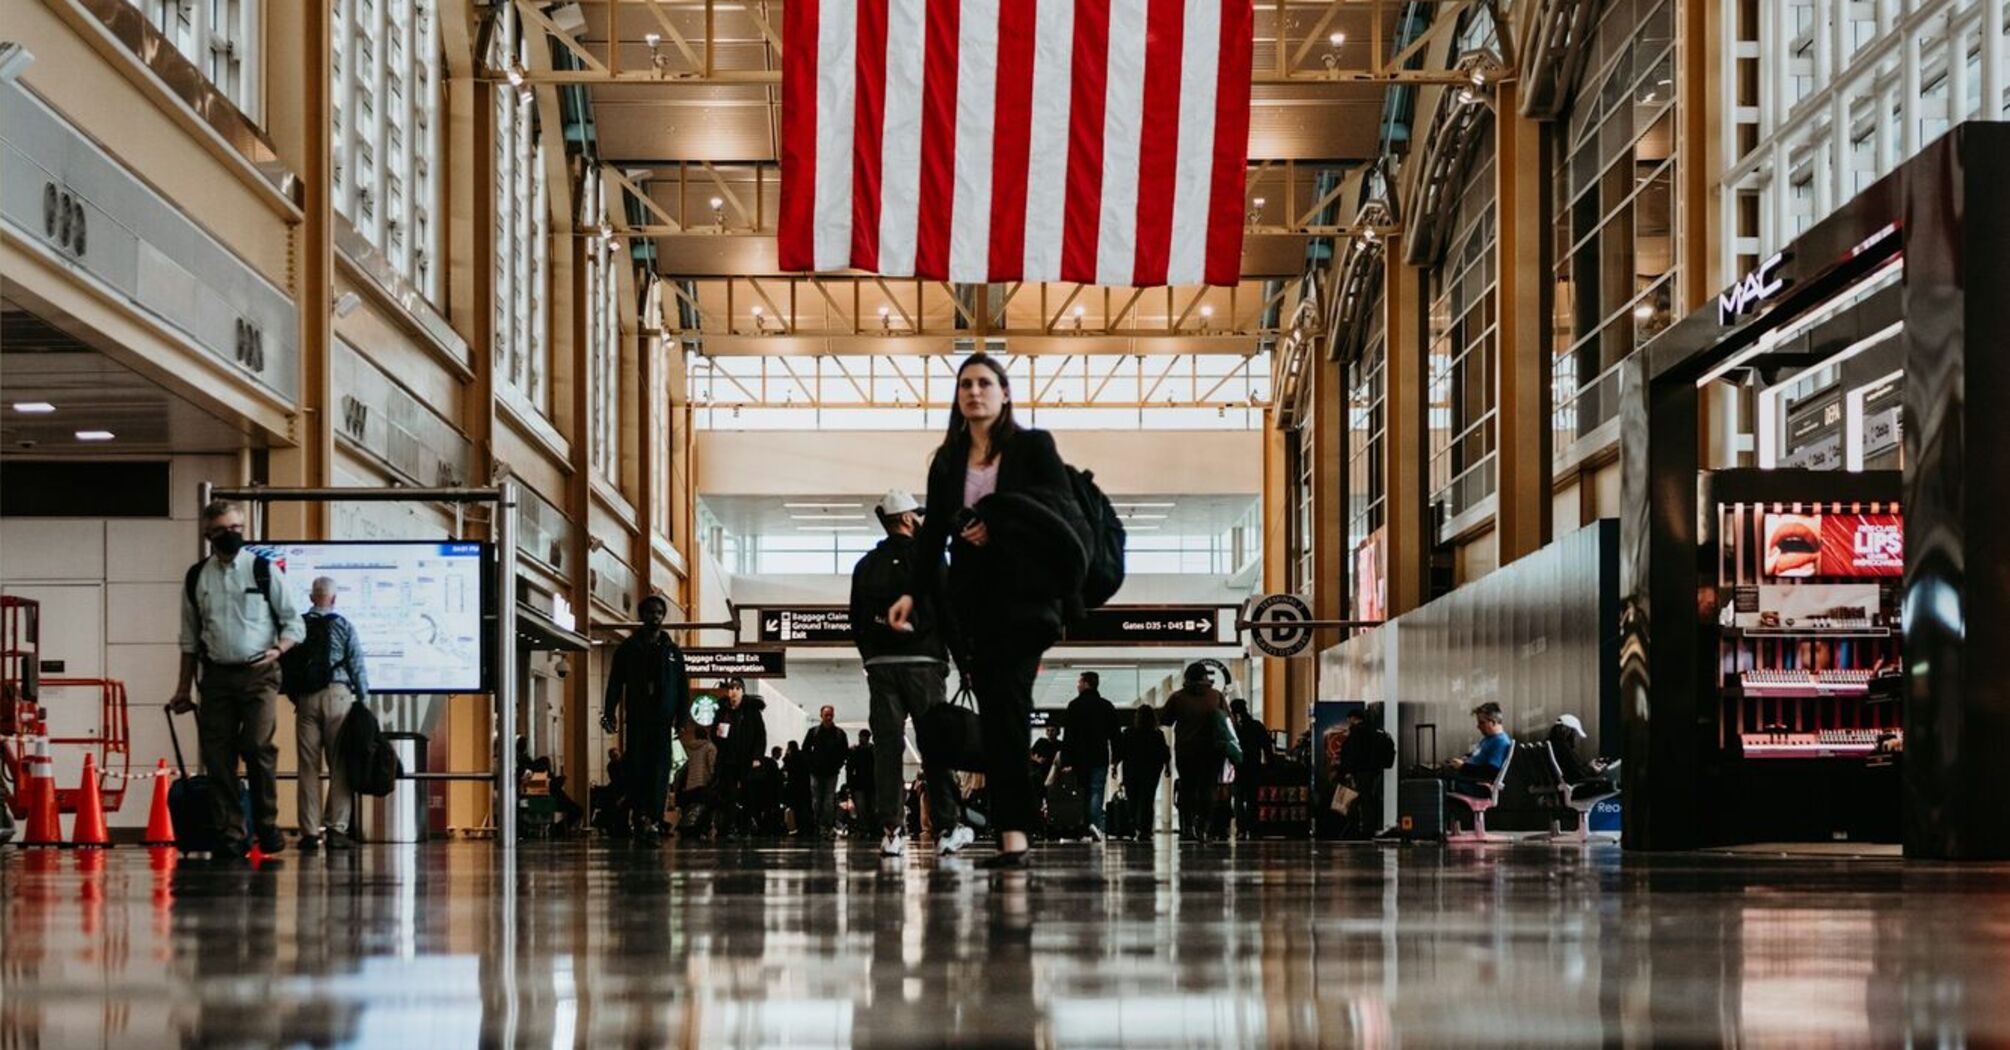 Busy terminal at Reagan National Airport under a large American flag